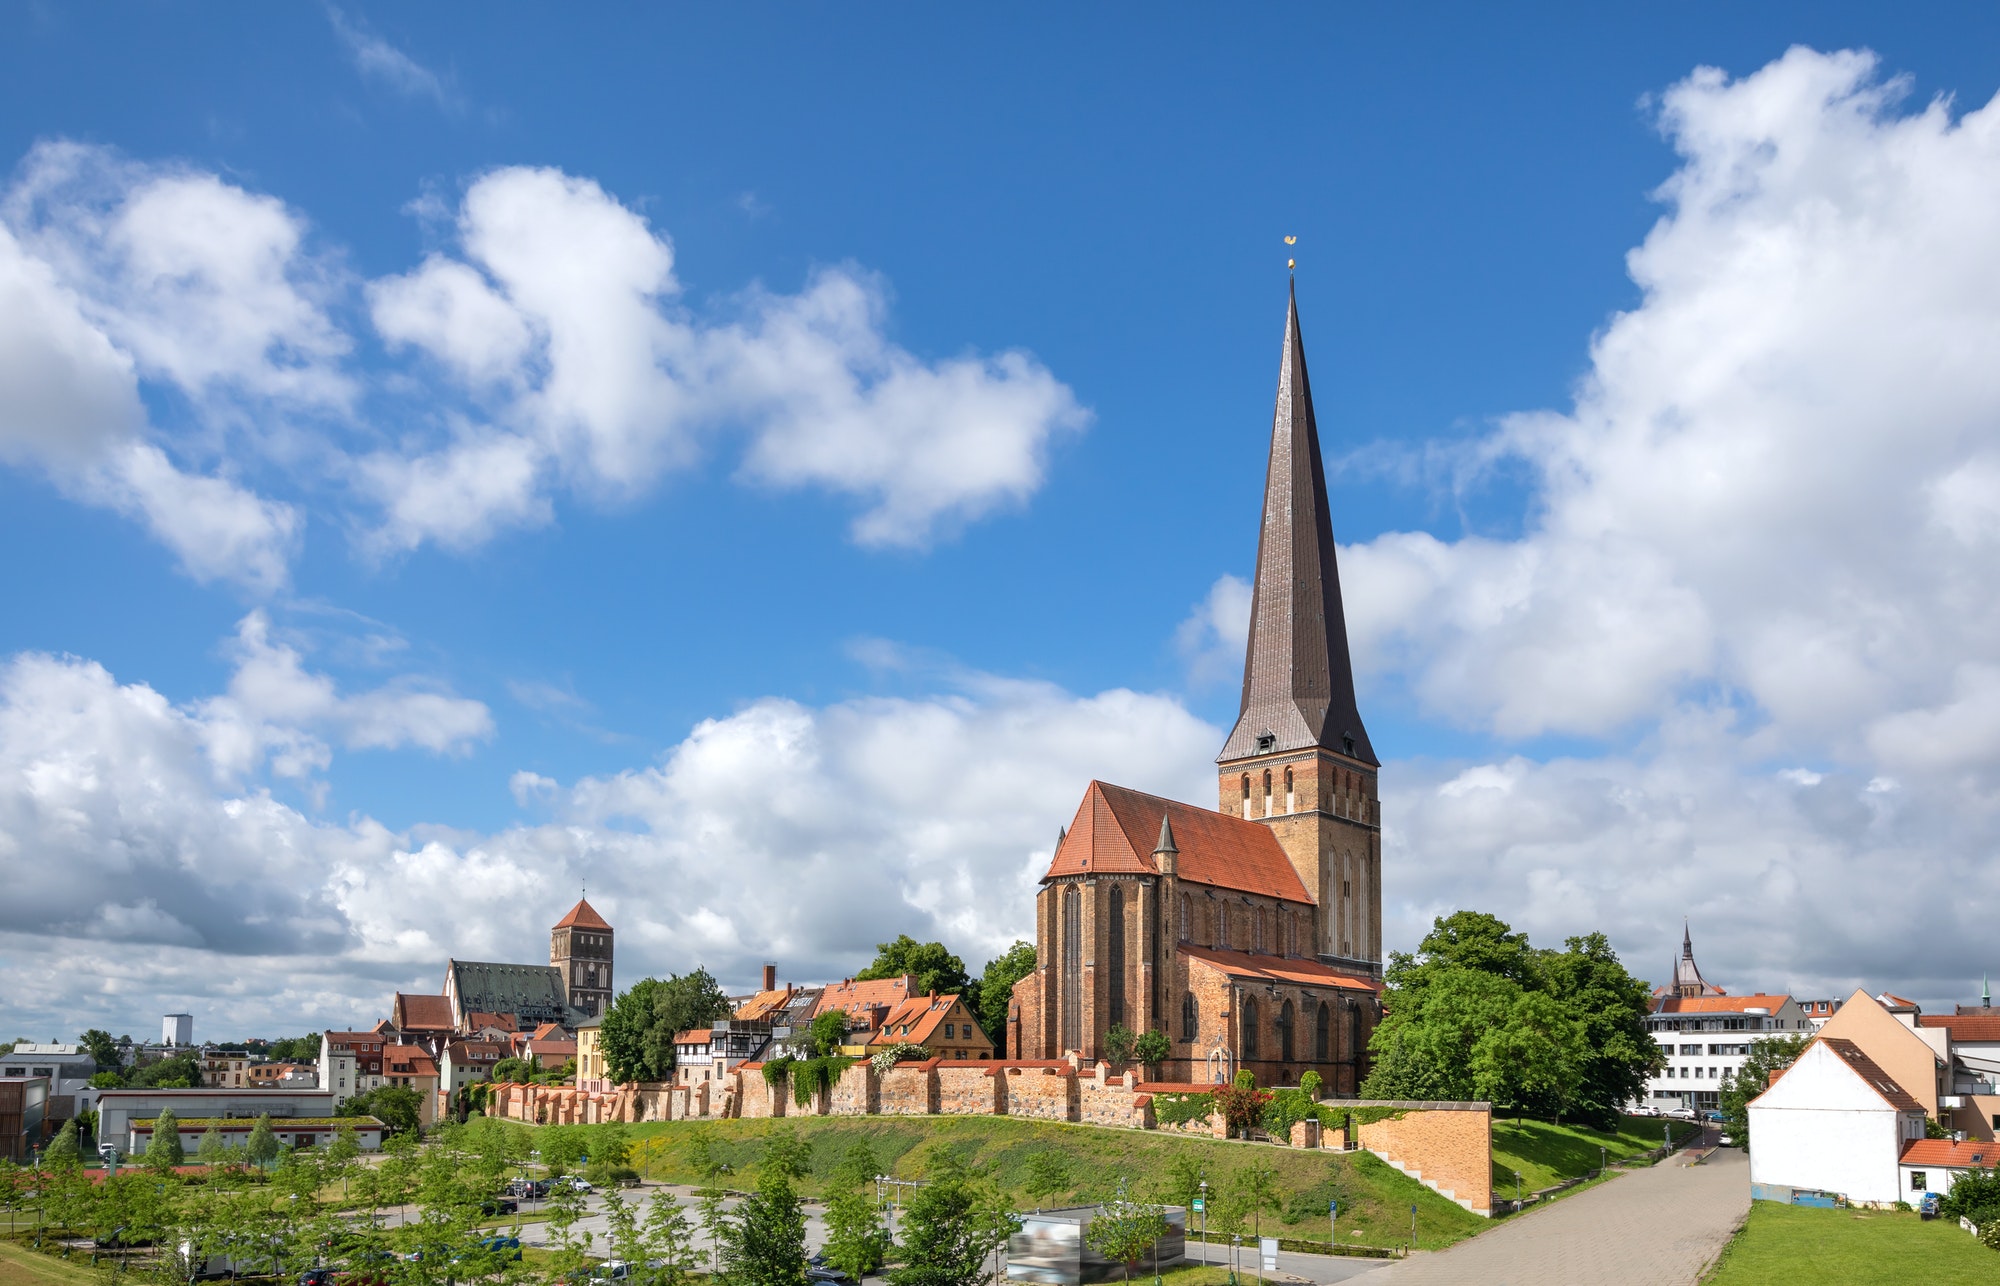 View of St. Peter's Church in Rostock, Germany